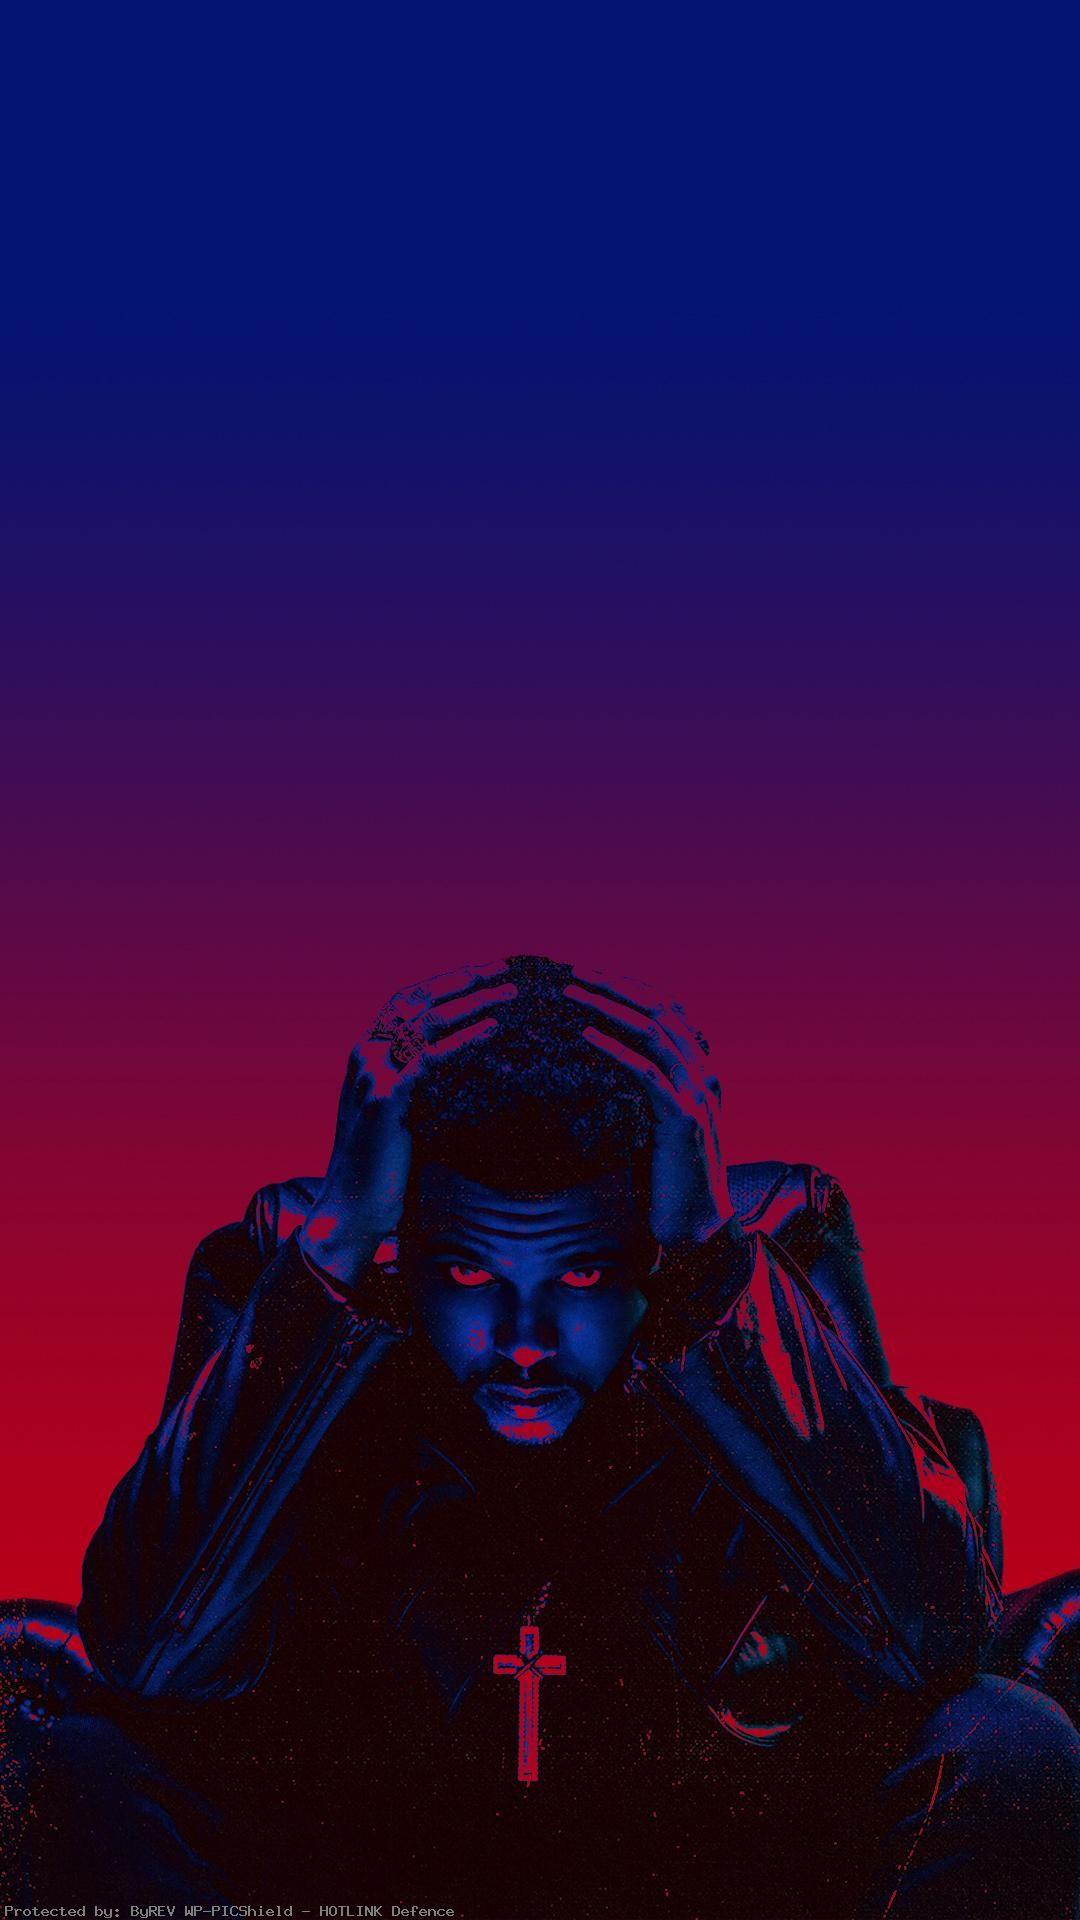 Dope Wallpaper for iPhone